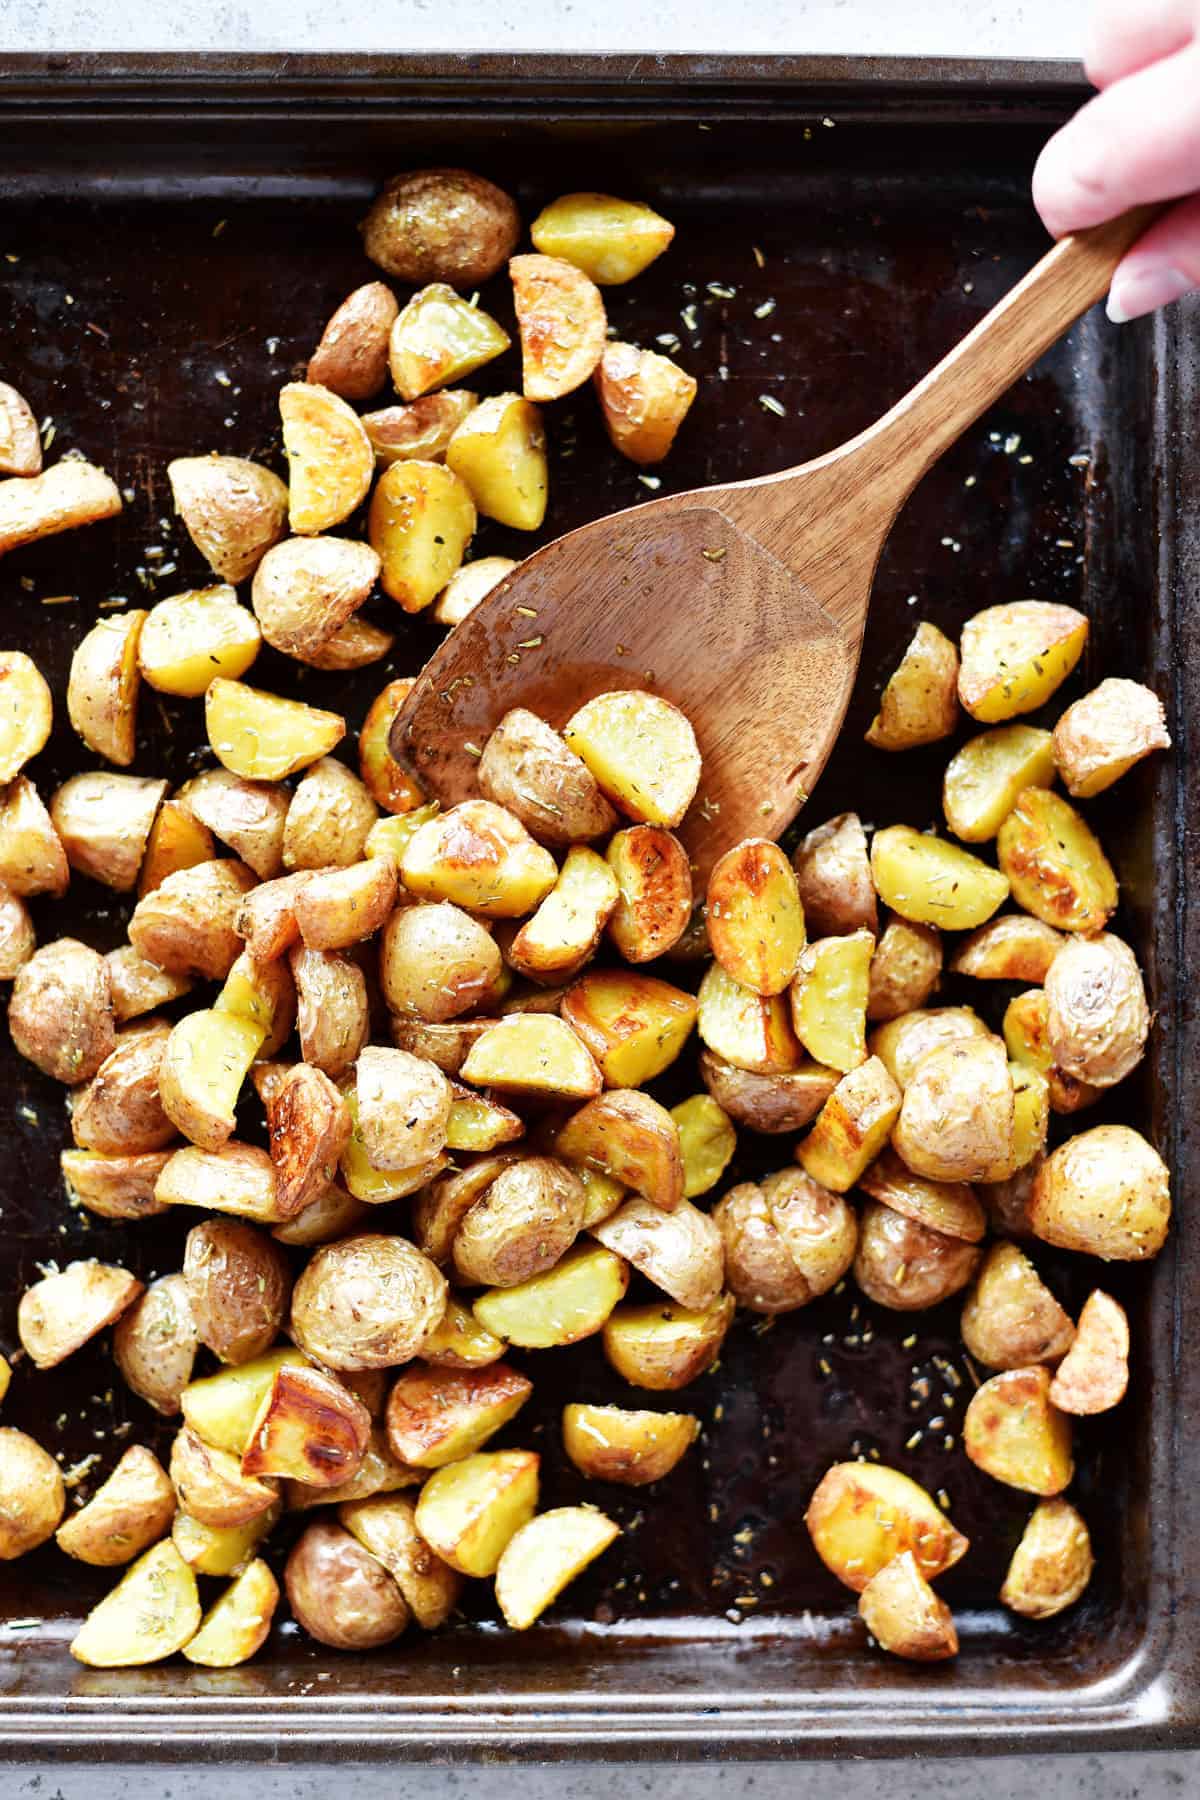 oven roasted potatoes in sheet pan with wooden spoon